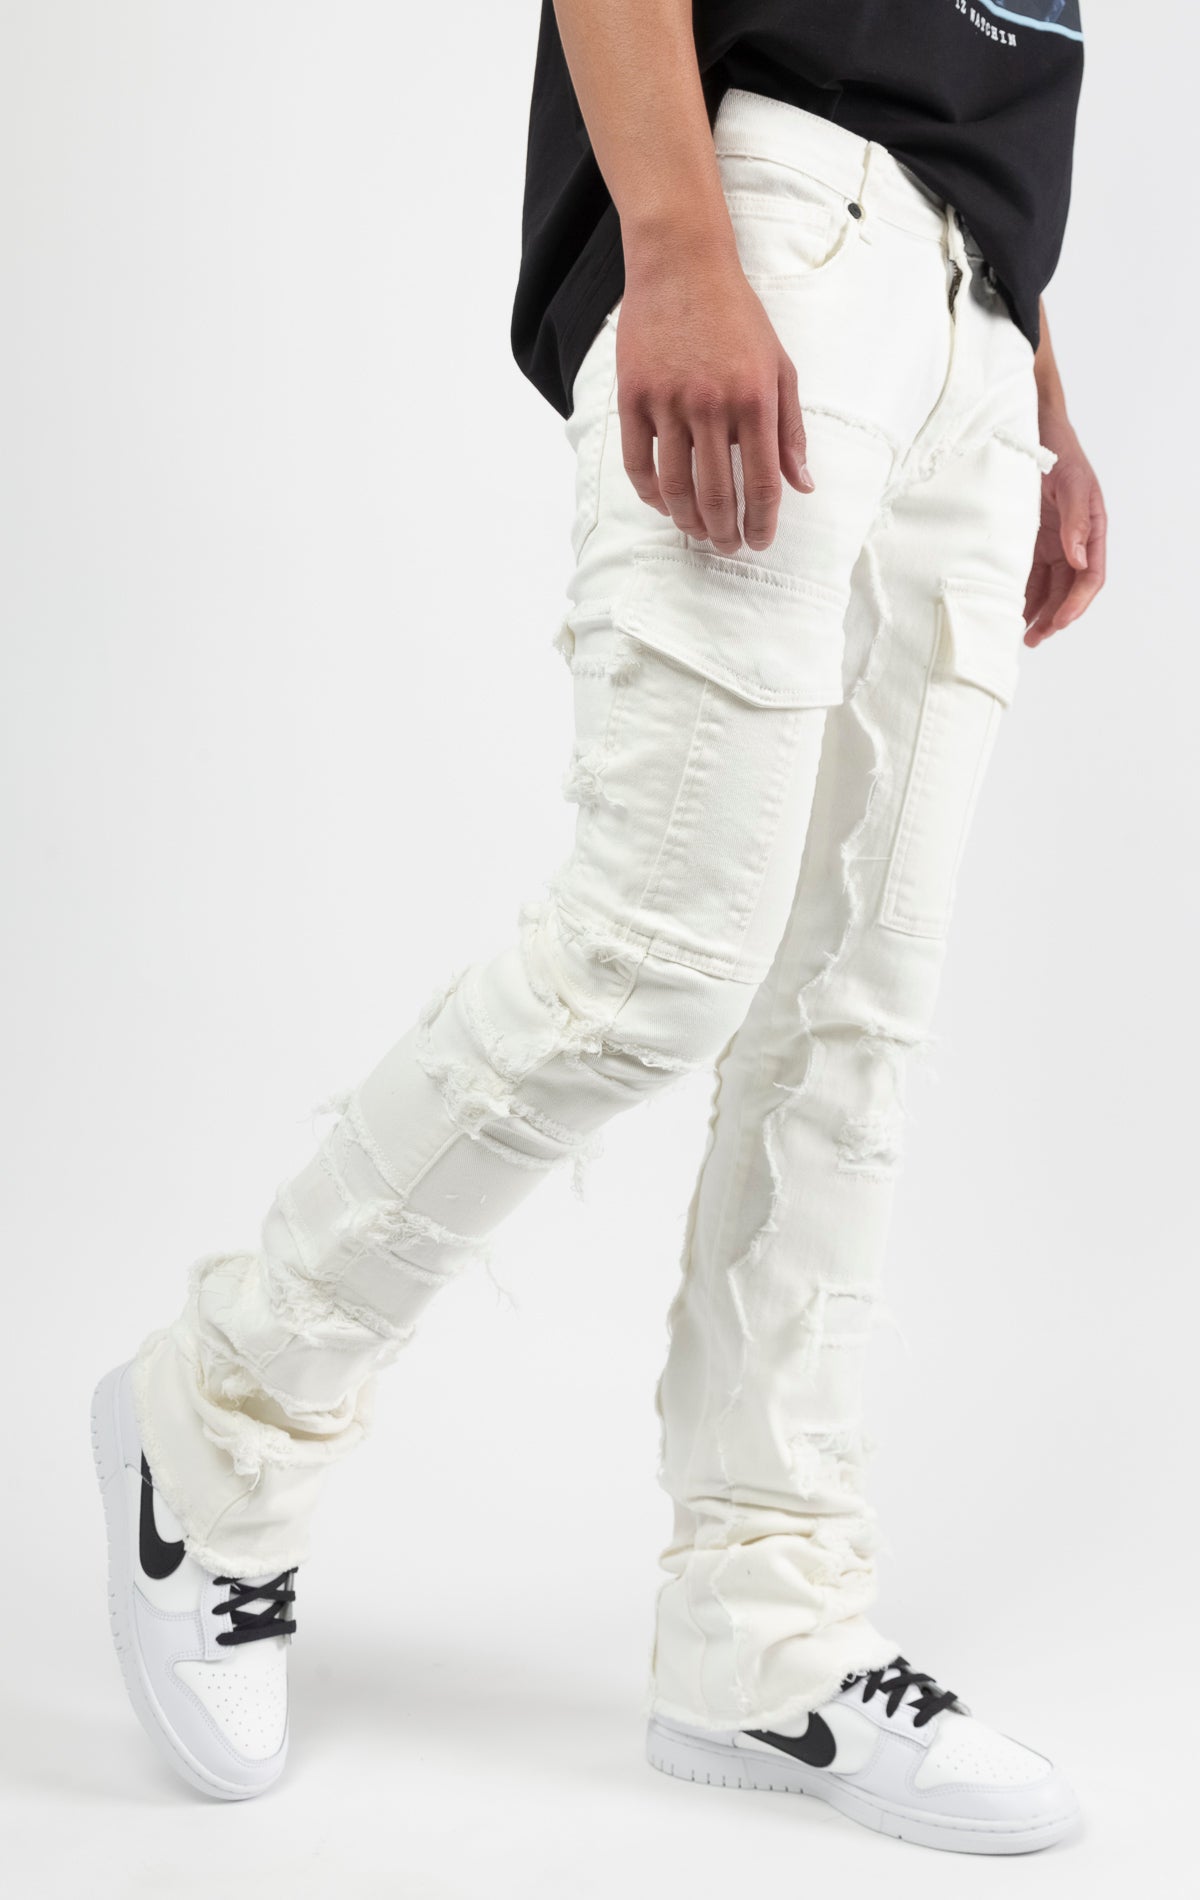 White Fray panel with stitch design, stacked cargo jeans with classic 5 pockets and flared bottom leg.